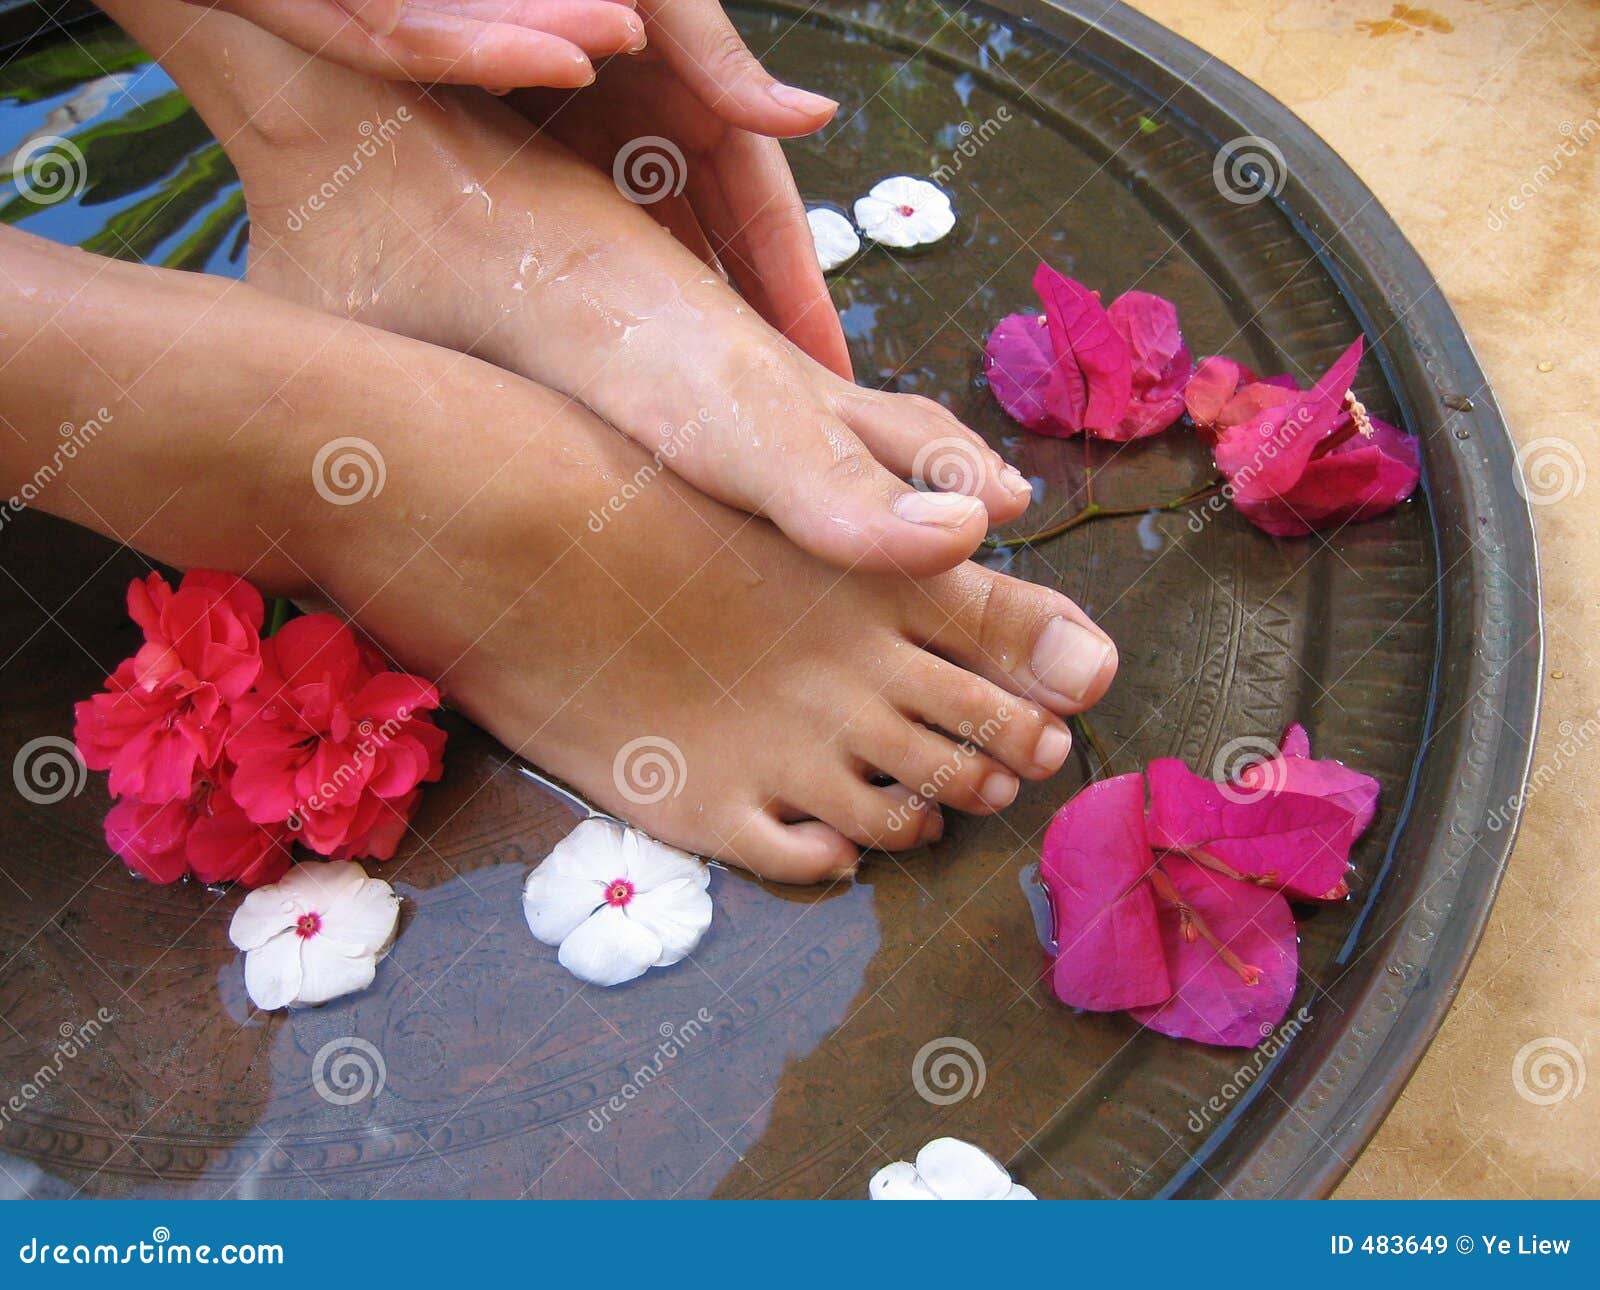 Foot Bath 1e Royalty Free Stock Images Image 483649